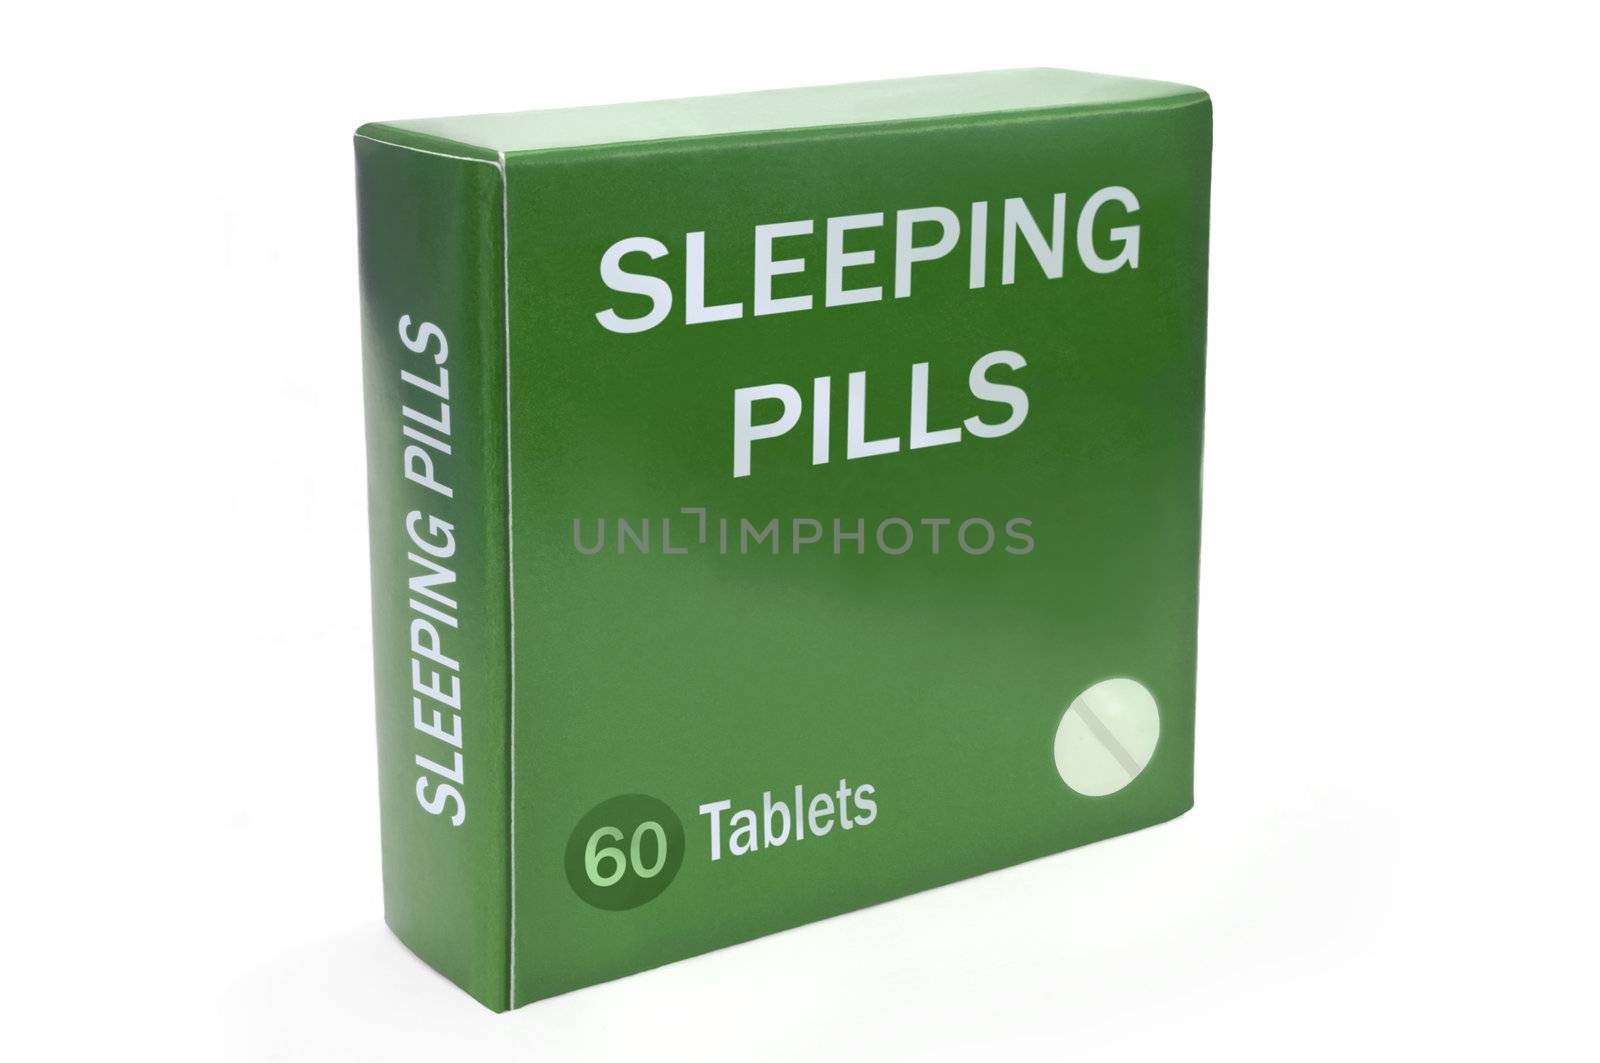 Close up of a green box with the words "SLEEPING PILLS" arranged over white.